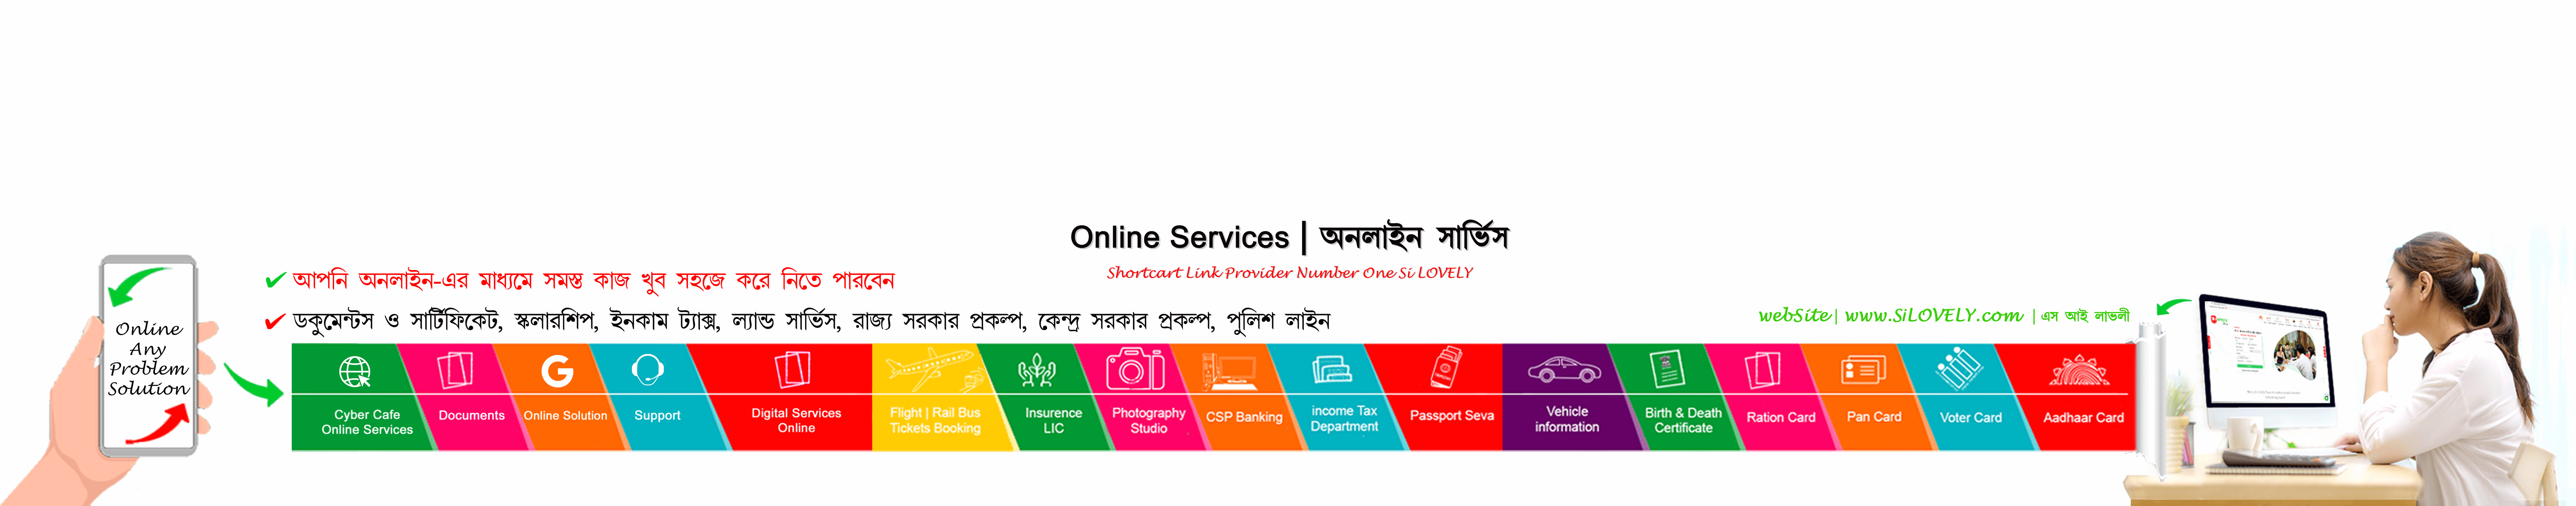 OnlineServices